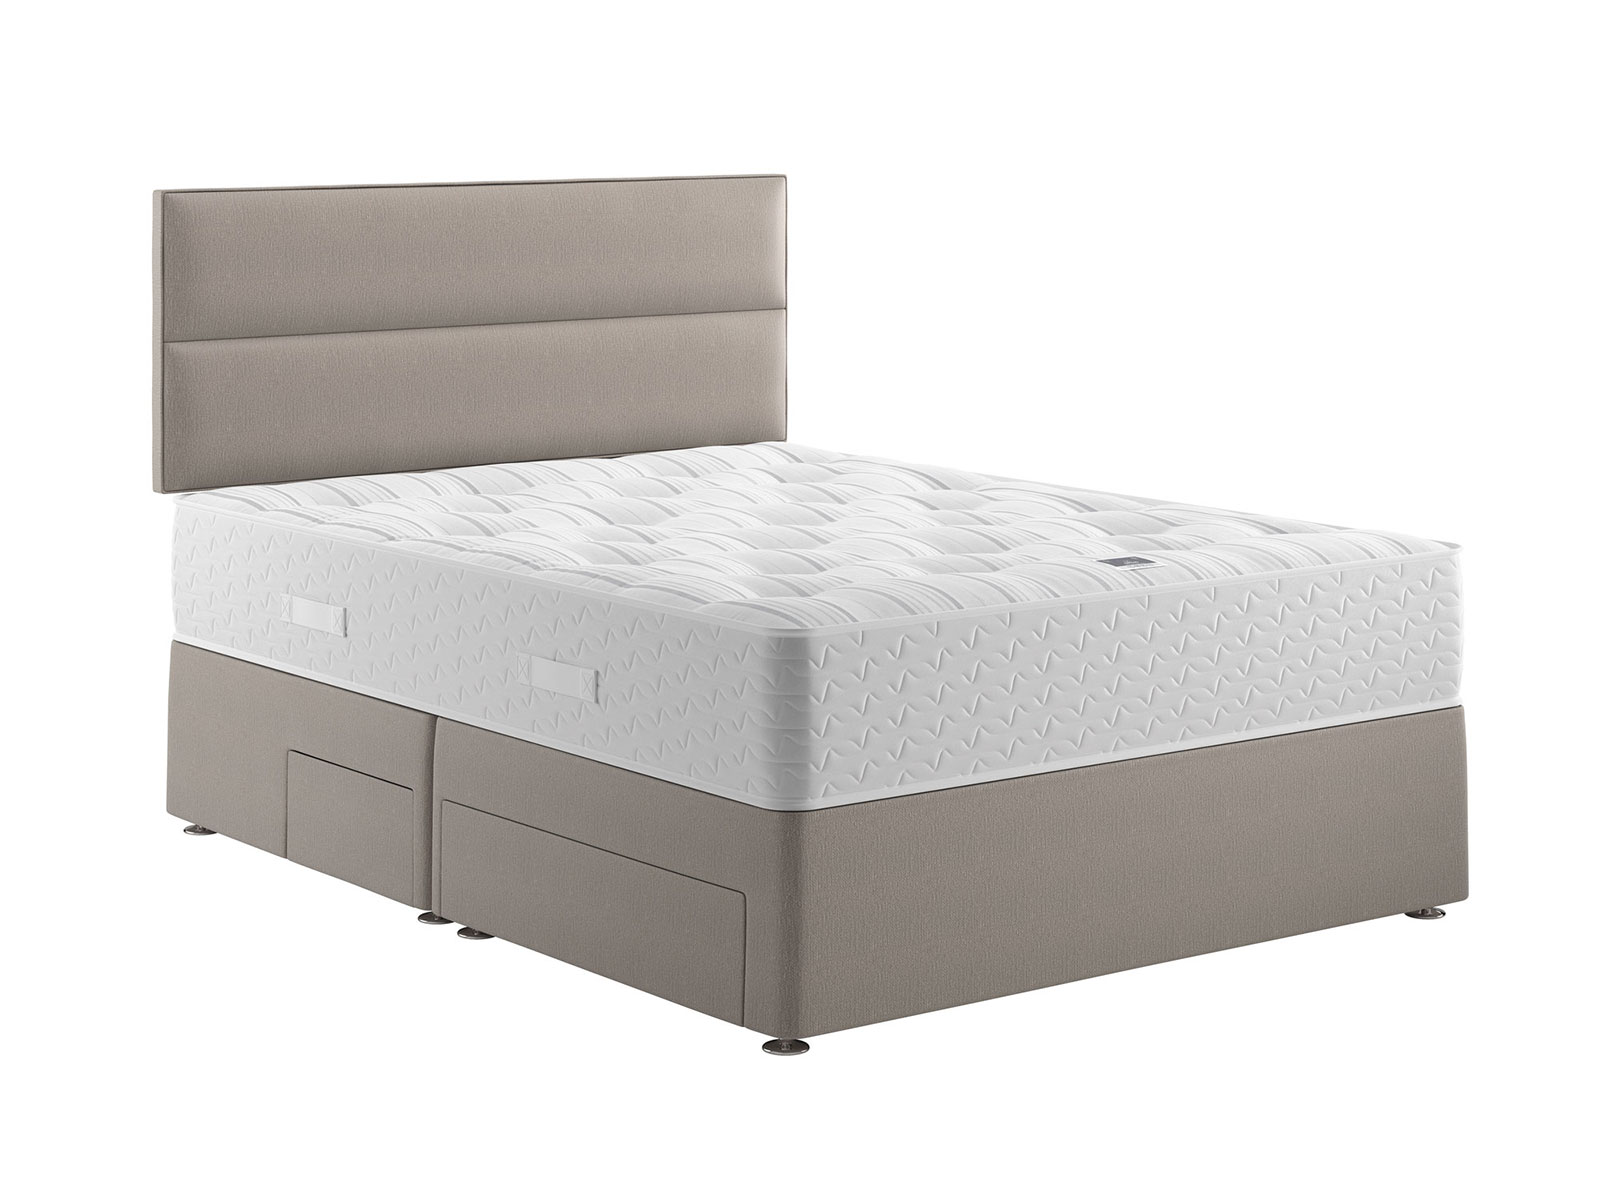 6ft Super King SIze Relyon Contemporary Backcare Ortho 800 Mattress